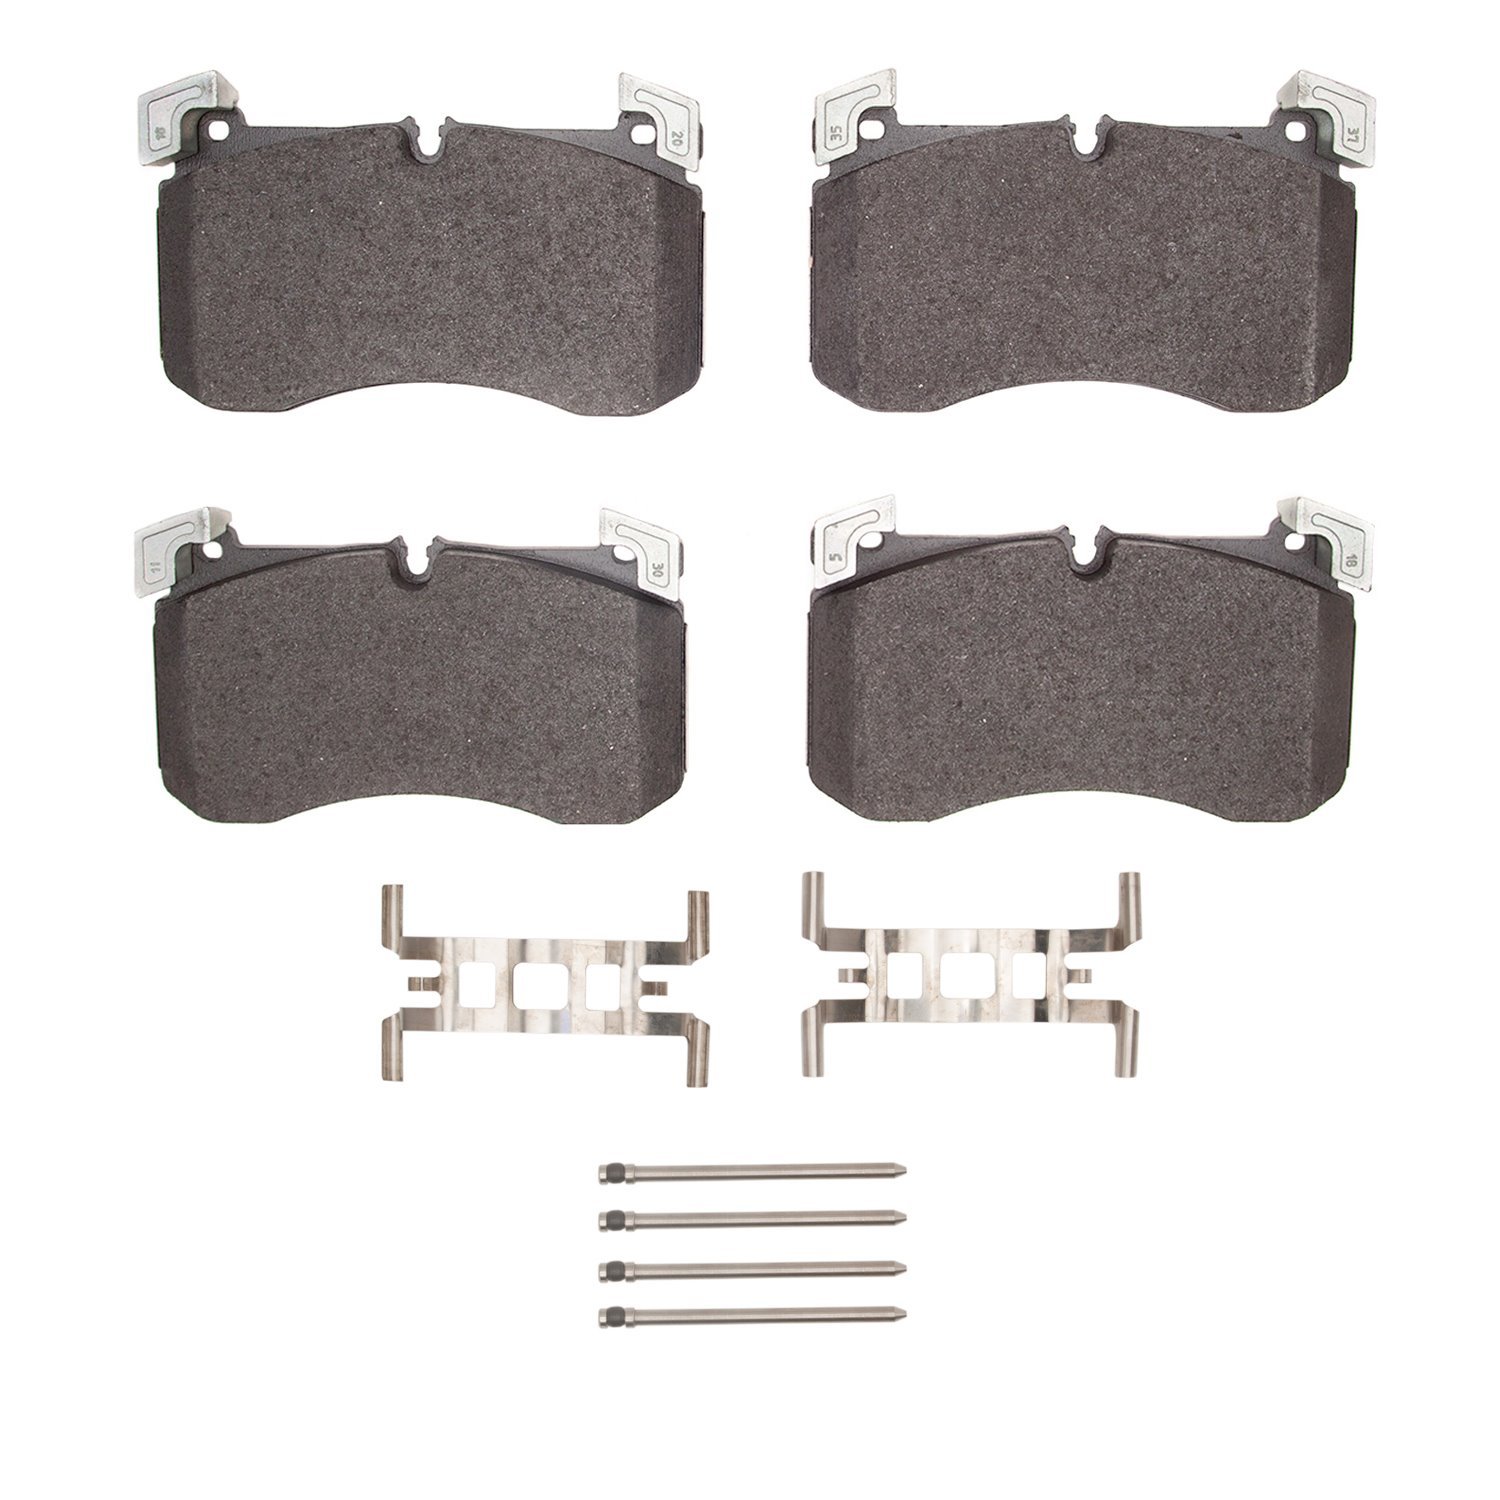 1551-2238-01 5000 Advanced Low-Metallic Brake Pads & Hardware Kit, Fits Select Mercedes-Benz, Position: Front